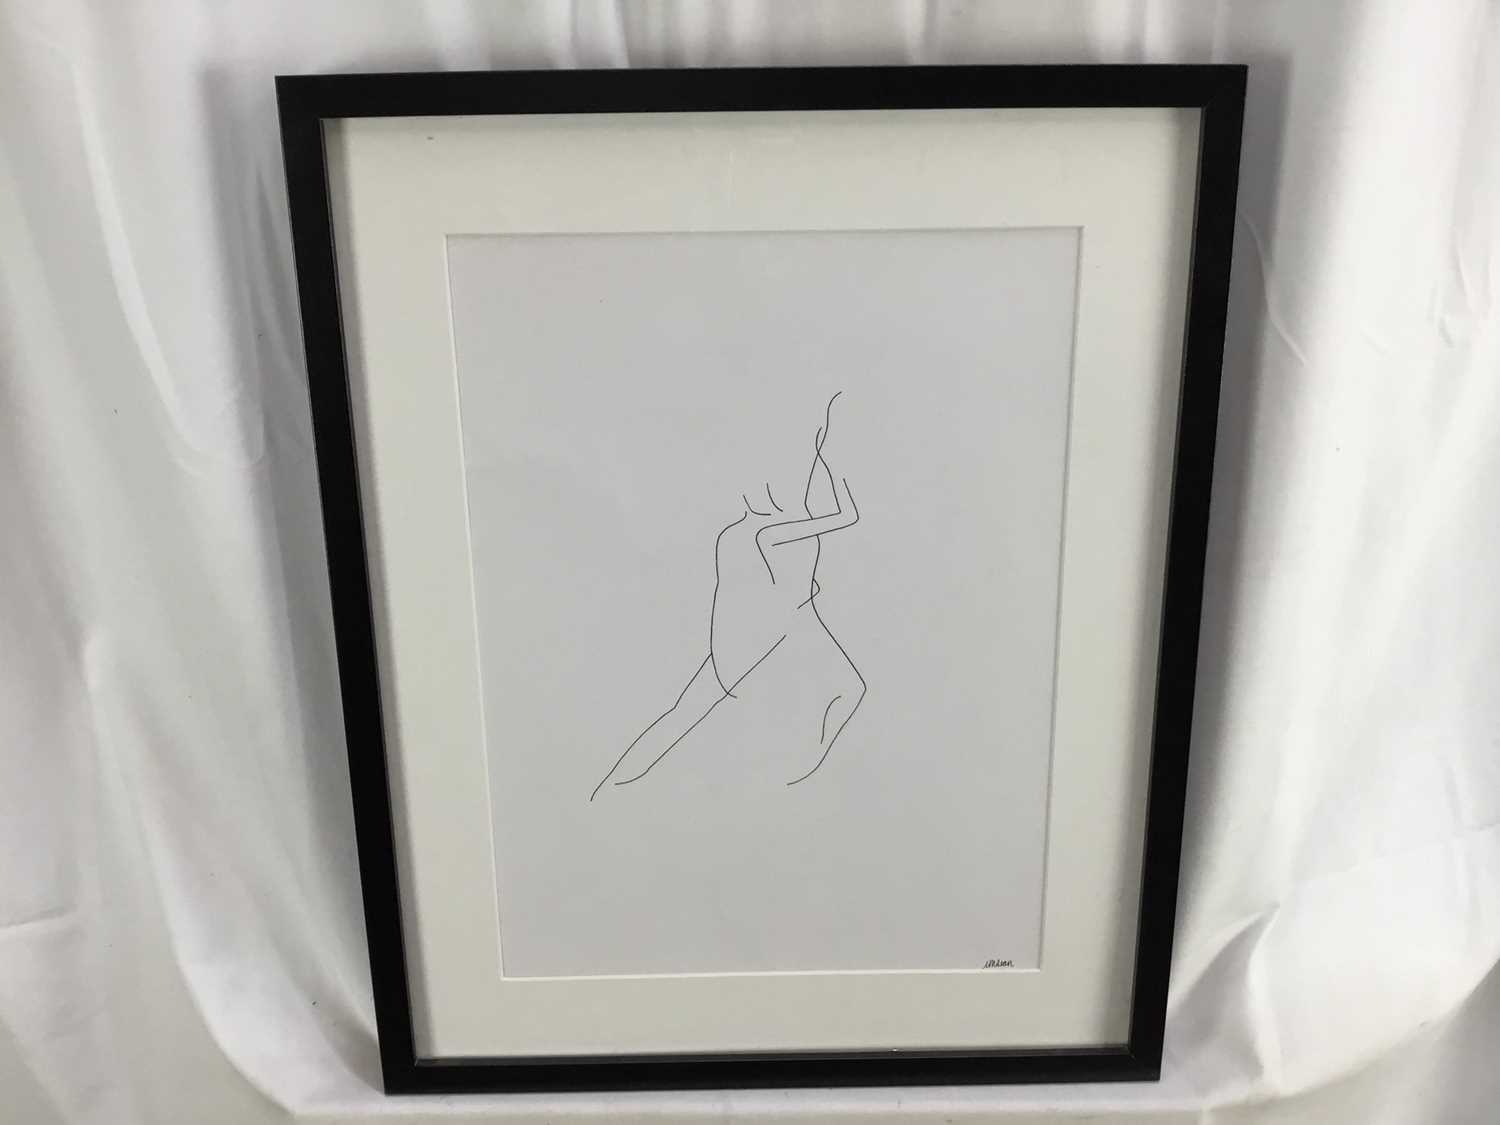 British, contemporary, five prints - studies of dancers, one duplicate, three framed and two unframe - Image 5 of 6